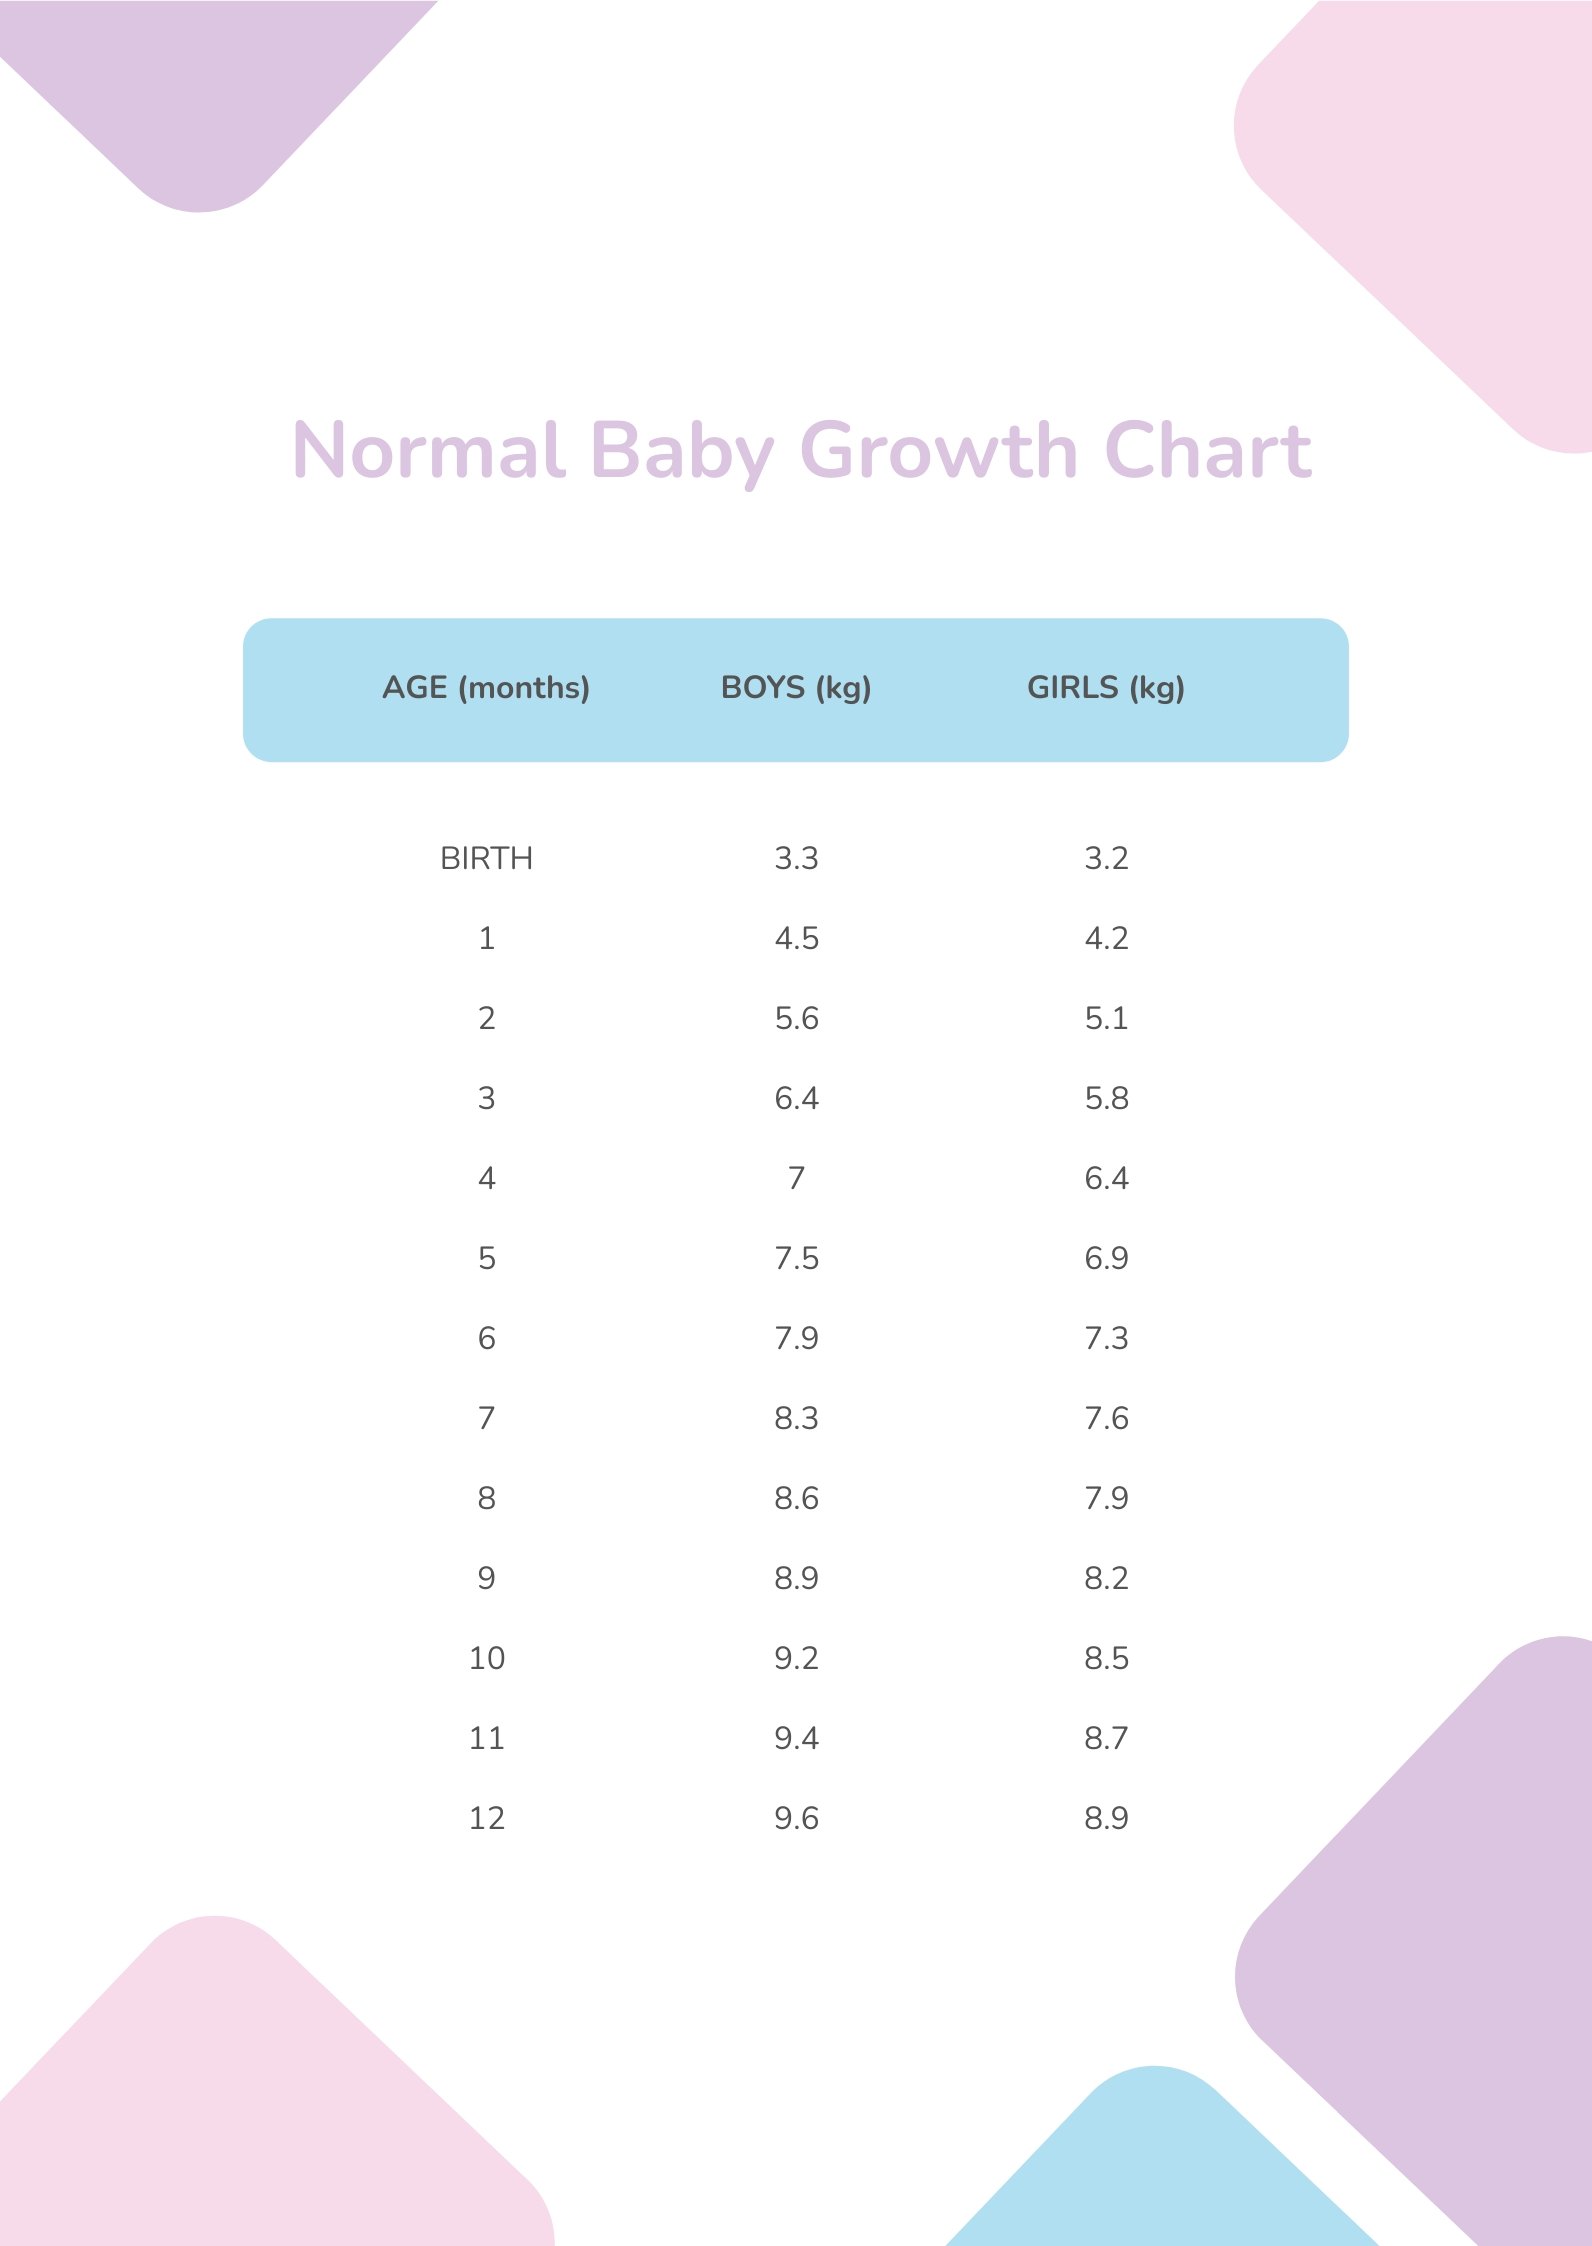 Normal Baby Growth Chart